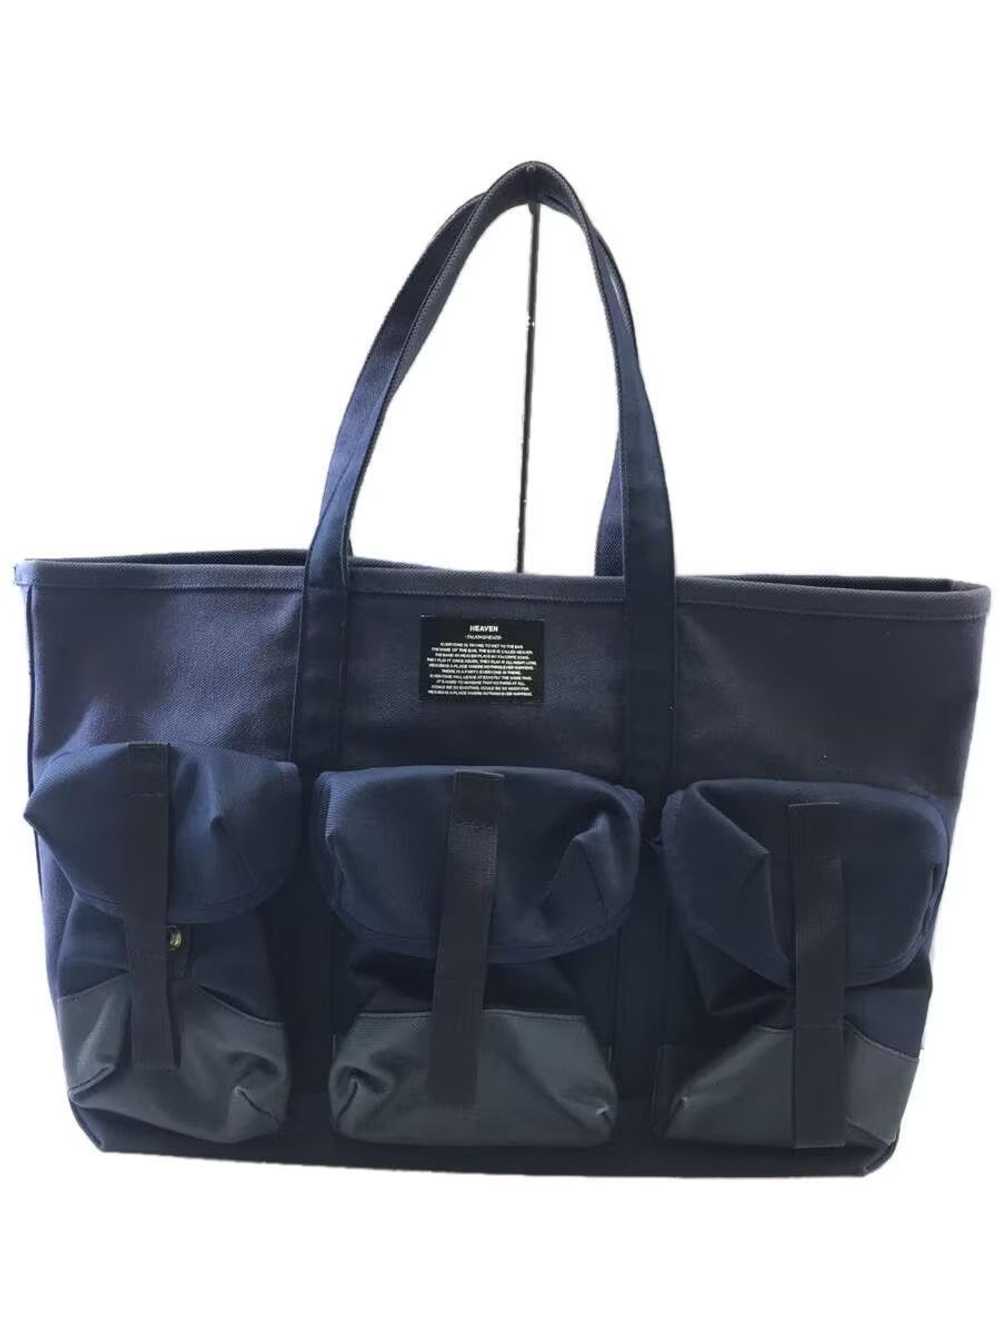 Undercover SS13 "TALKING HEADS" Utility Tote Bag - image 1